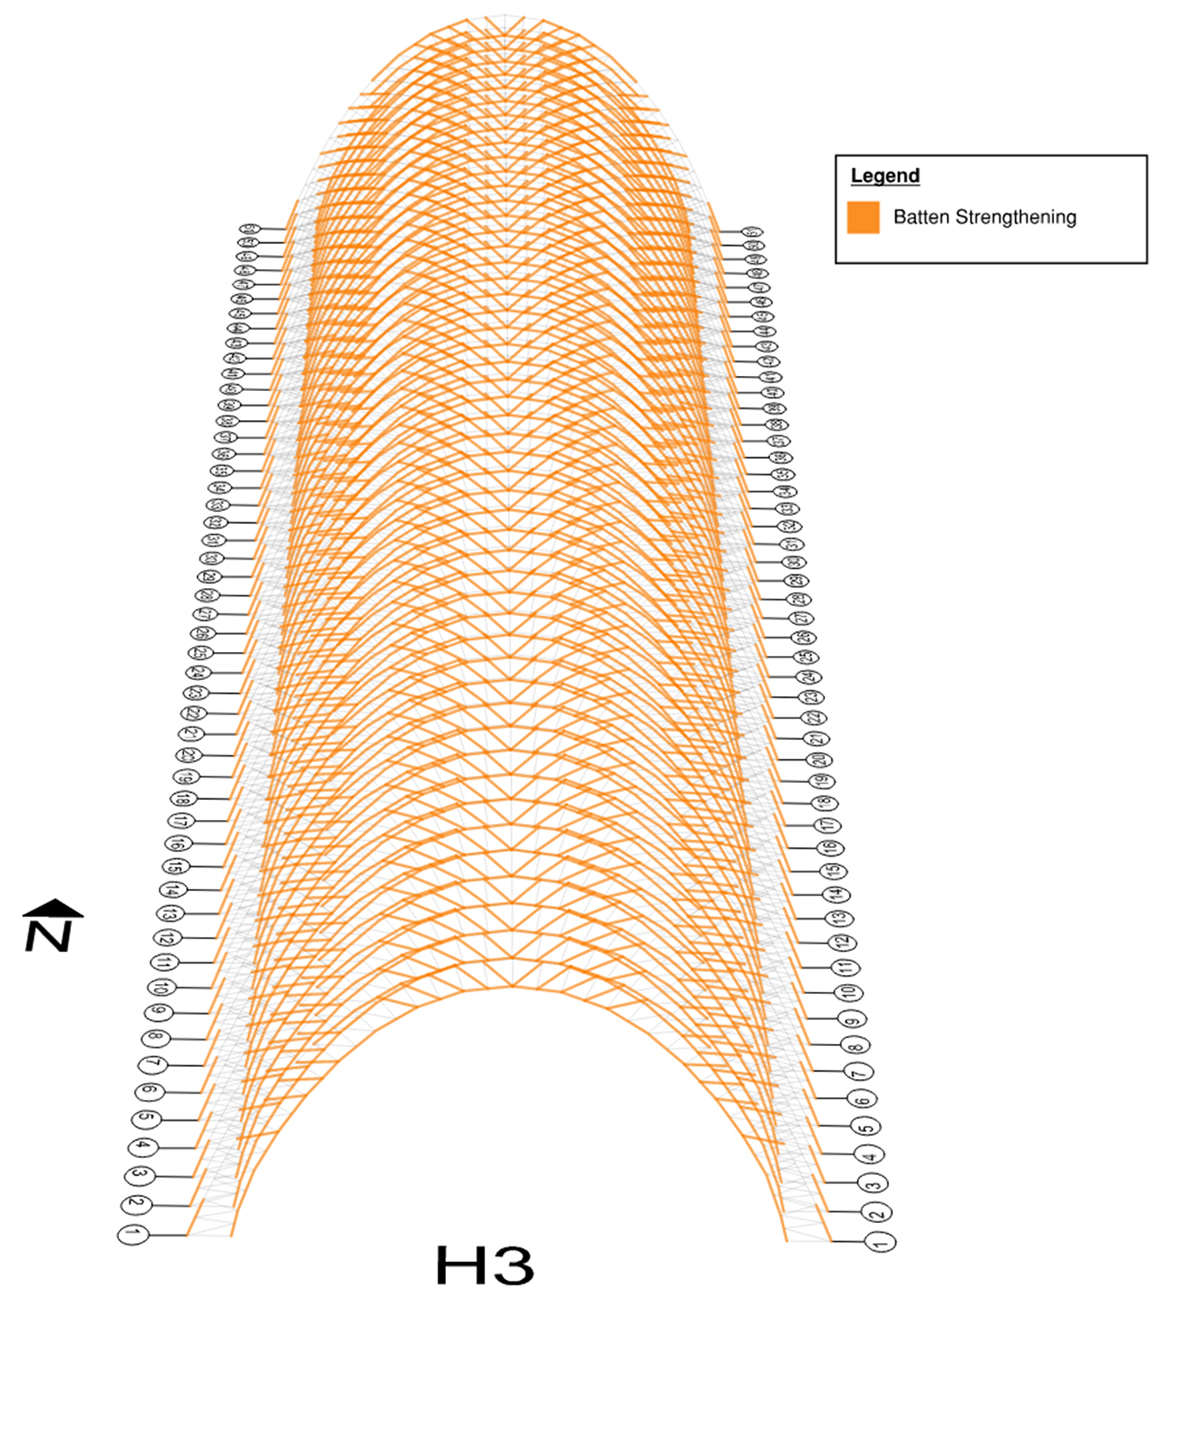 A 3D drawing of the entire length of Hangar 3 looking down on its parabolic arch trusses. The areas of the trusses that have been repaired are orange.